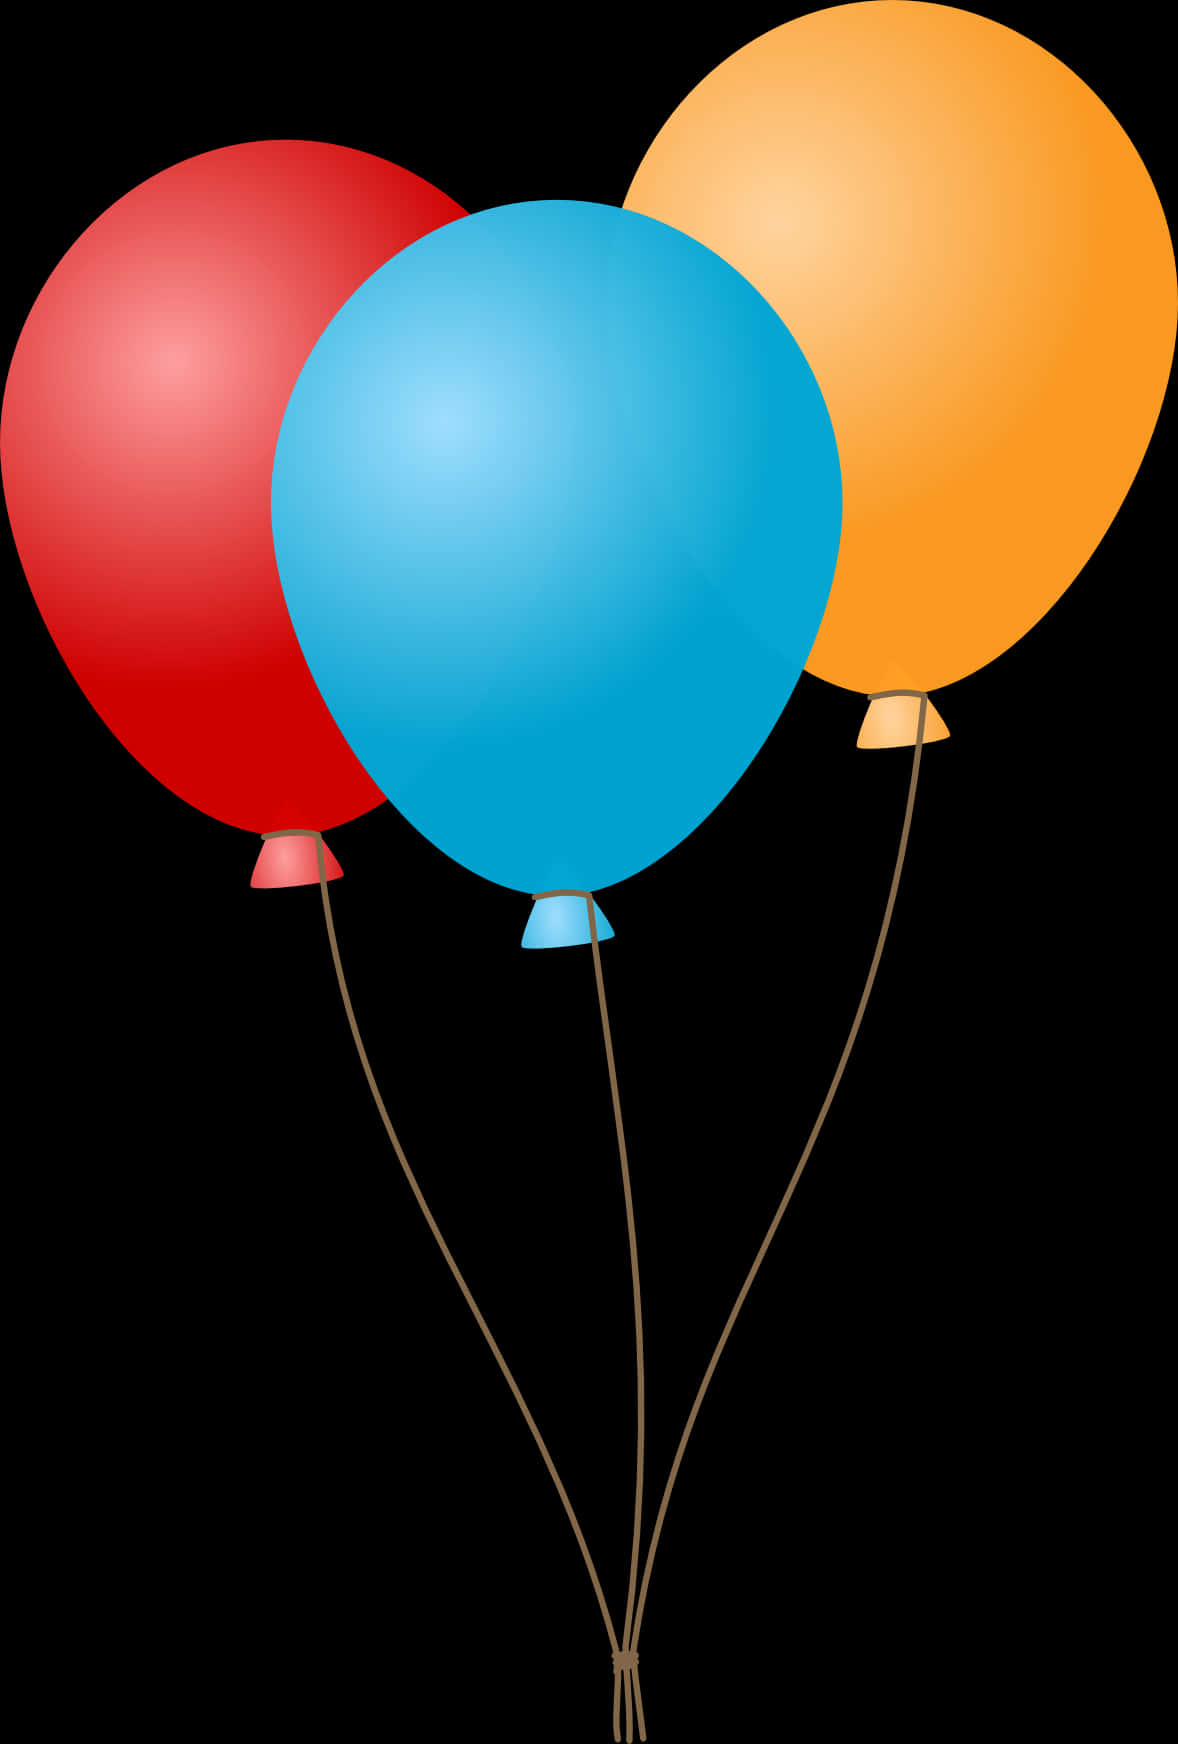 Colorful Balloonson Black Background PNG image